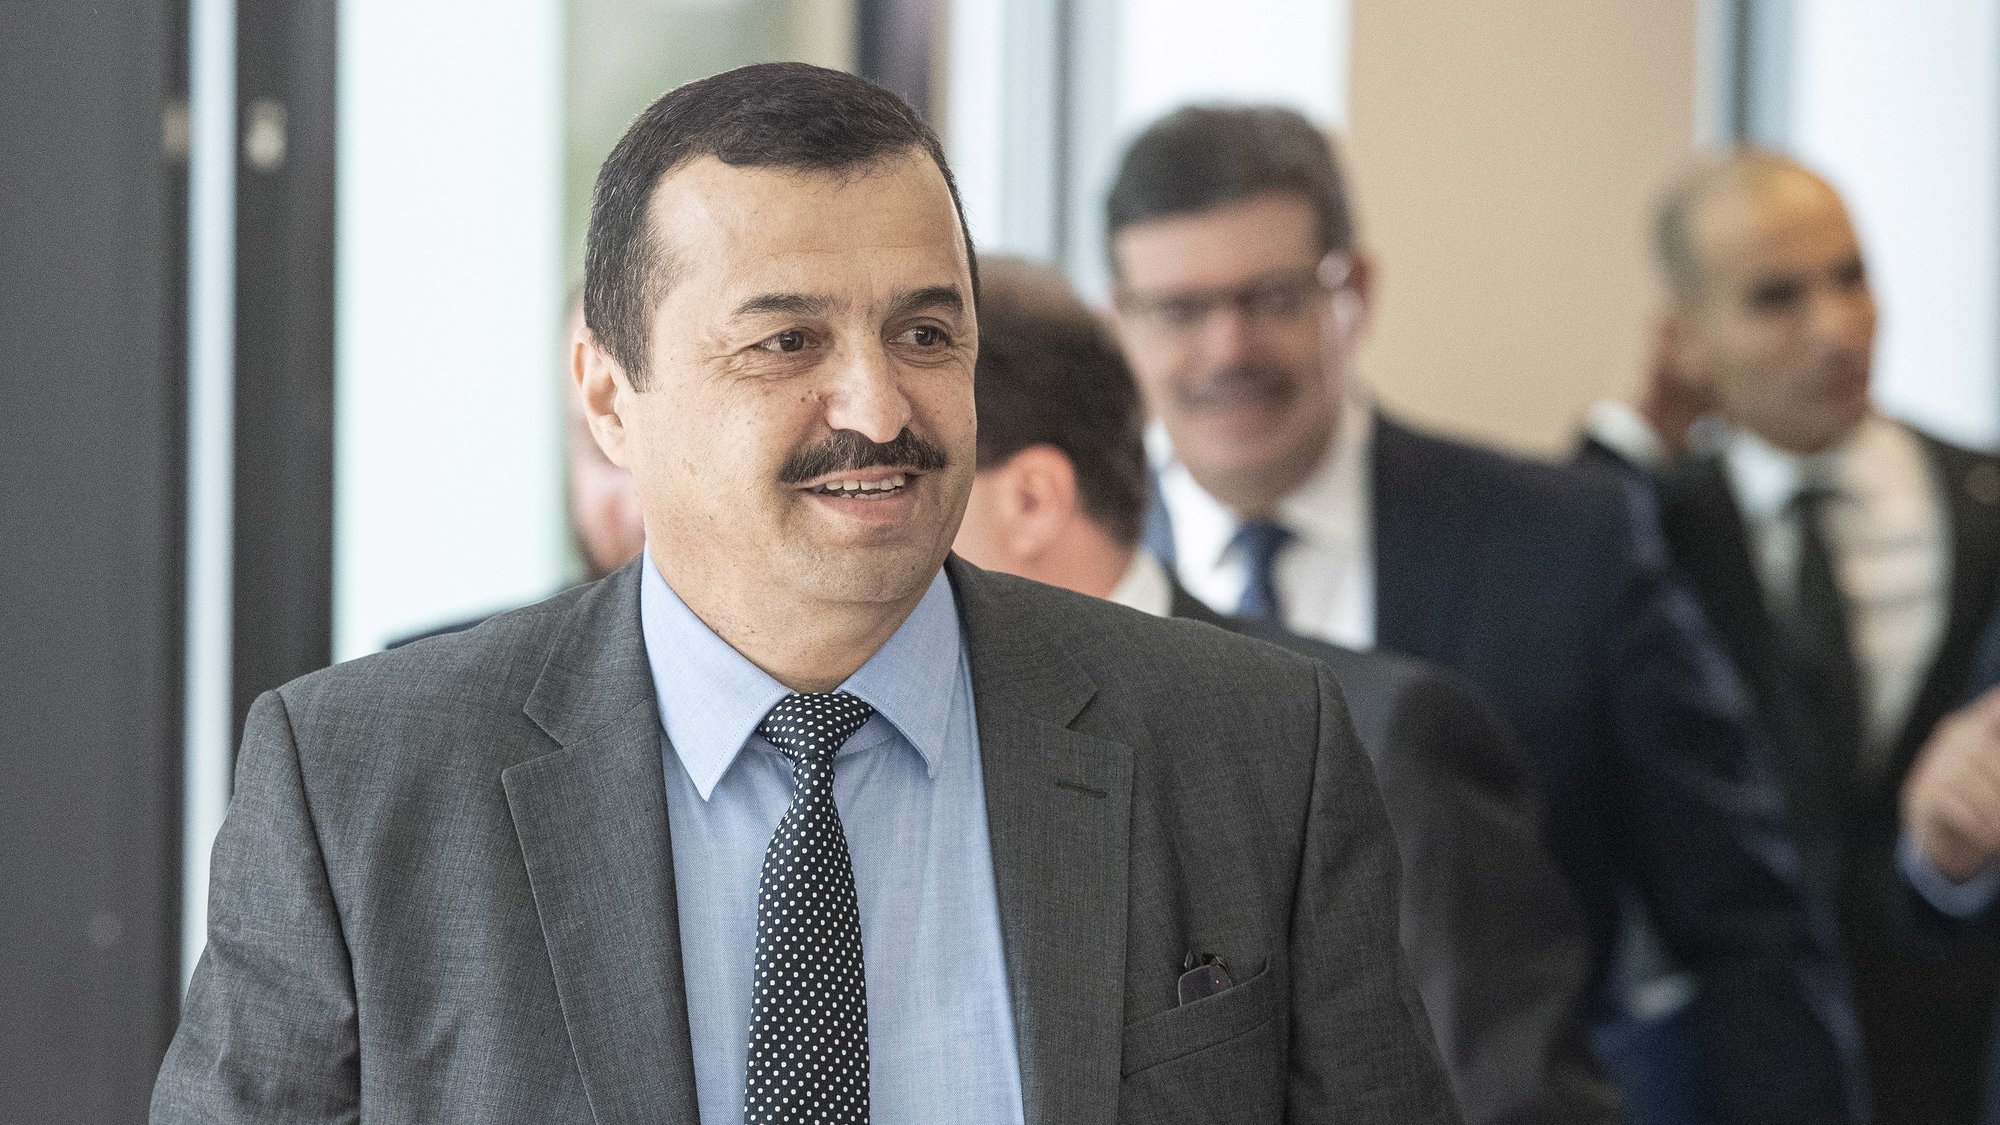 epa07686680 Mohamed Arkab, Energy Minister of Algeria, arrives for the 15th Meeting of the Joint Ministerial Monitoring Committee (JMMC) of Organization of Petroleum Exporting Countries (OPEC) meeting at the OPEC head quarters in Vienna, Austria, 01 July 2019.  EPA/CHRISTIAN BRUNA